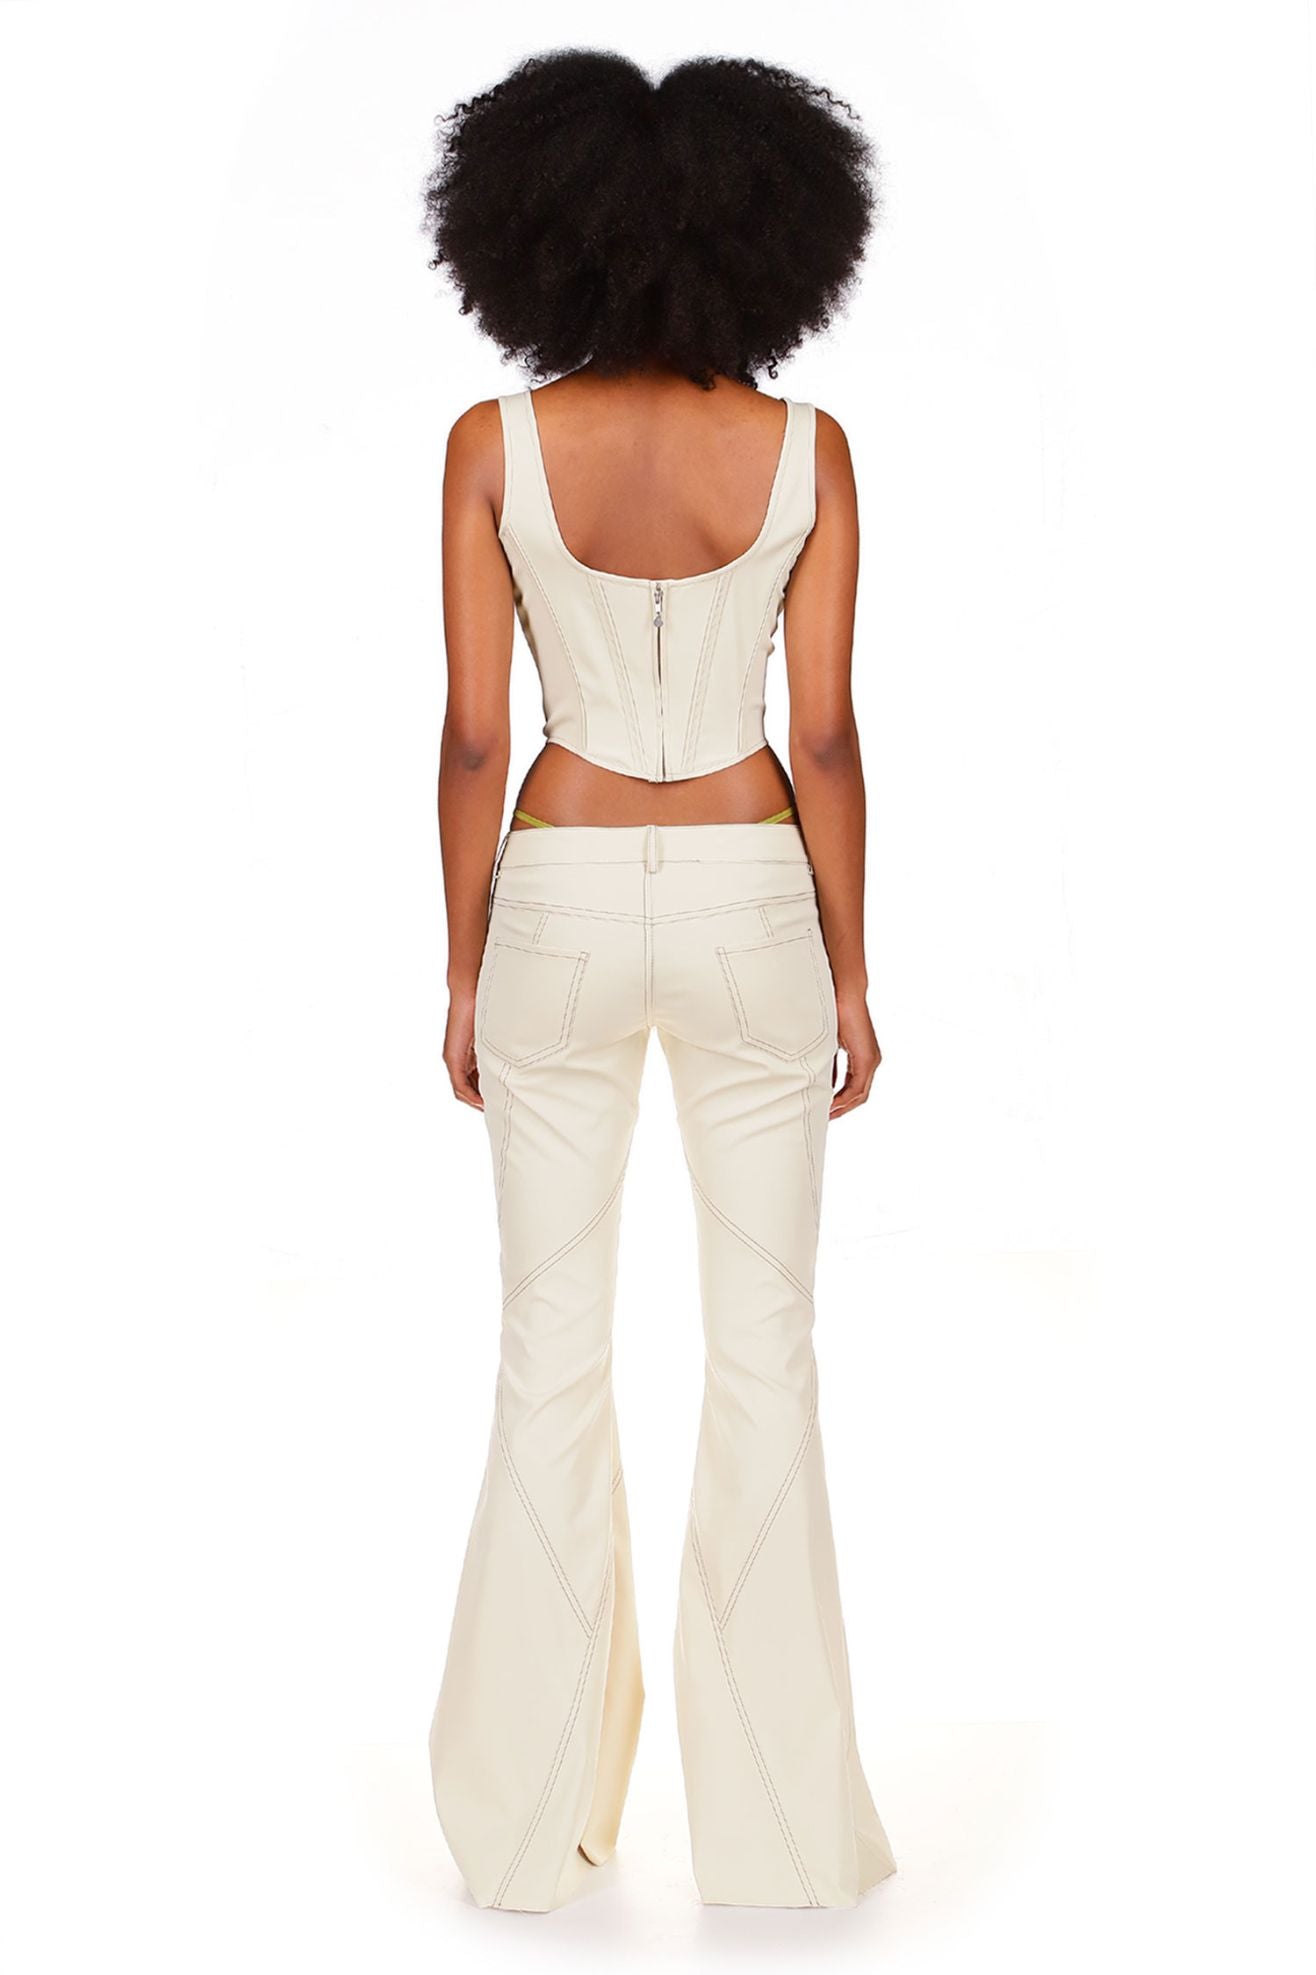 Low Waist Flare Pant with Lace